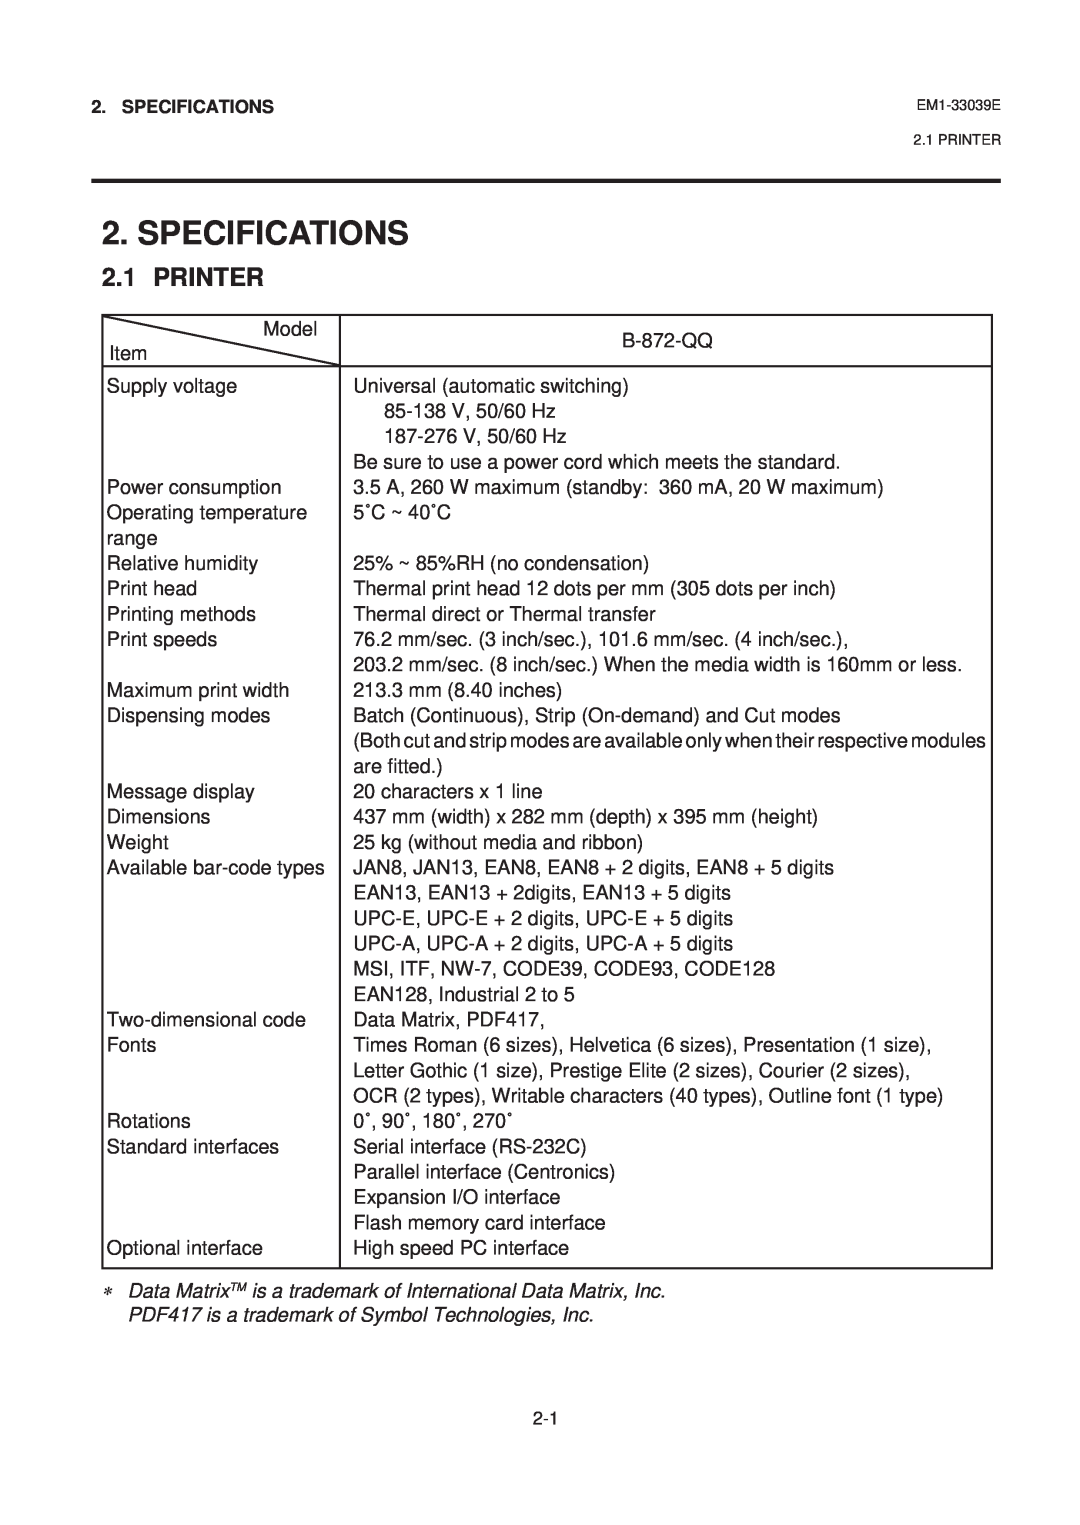 Toshiba EM1-33039EE, B-870 SERIES owner manual Specifications, Printer 